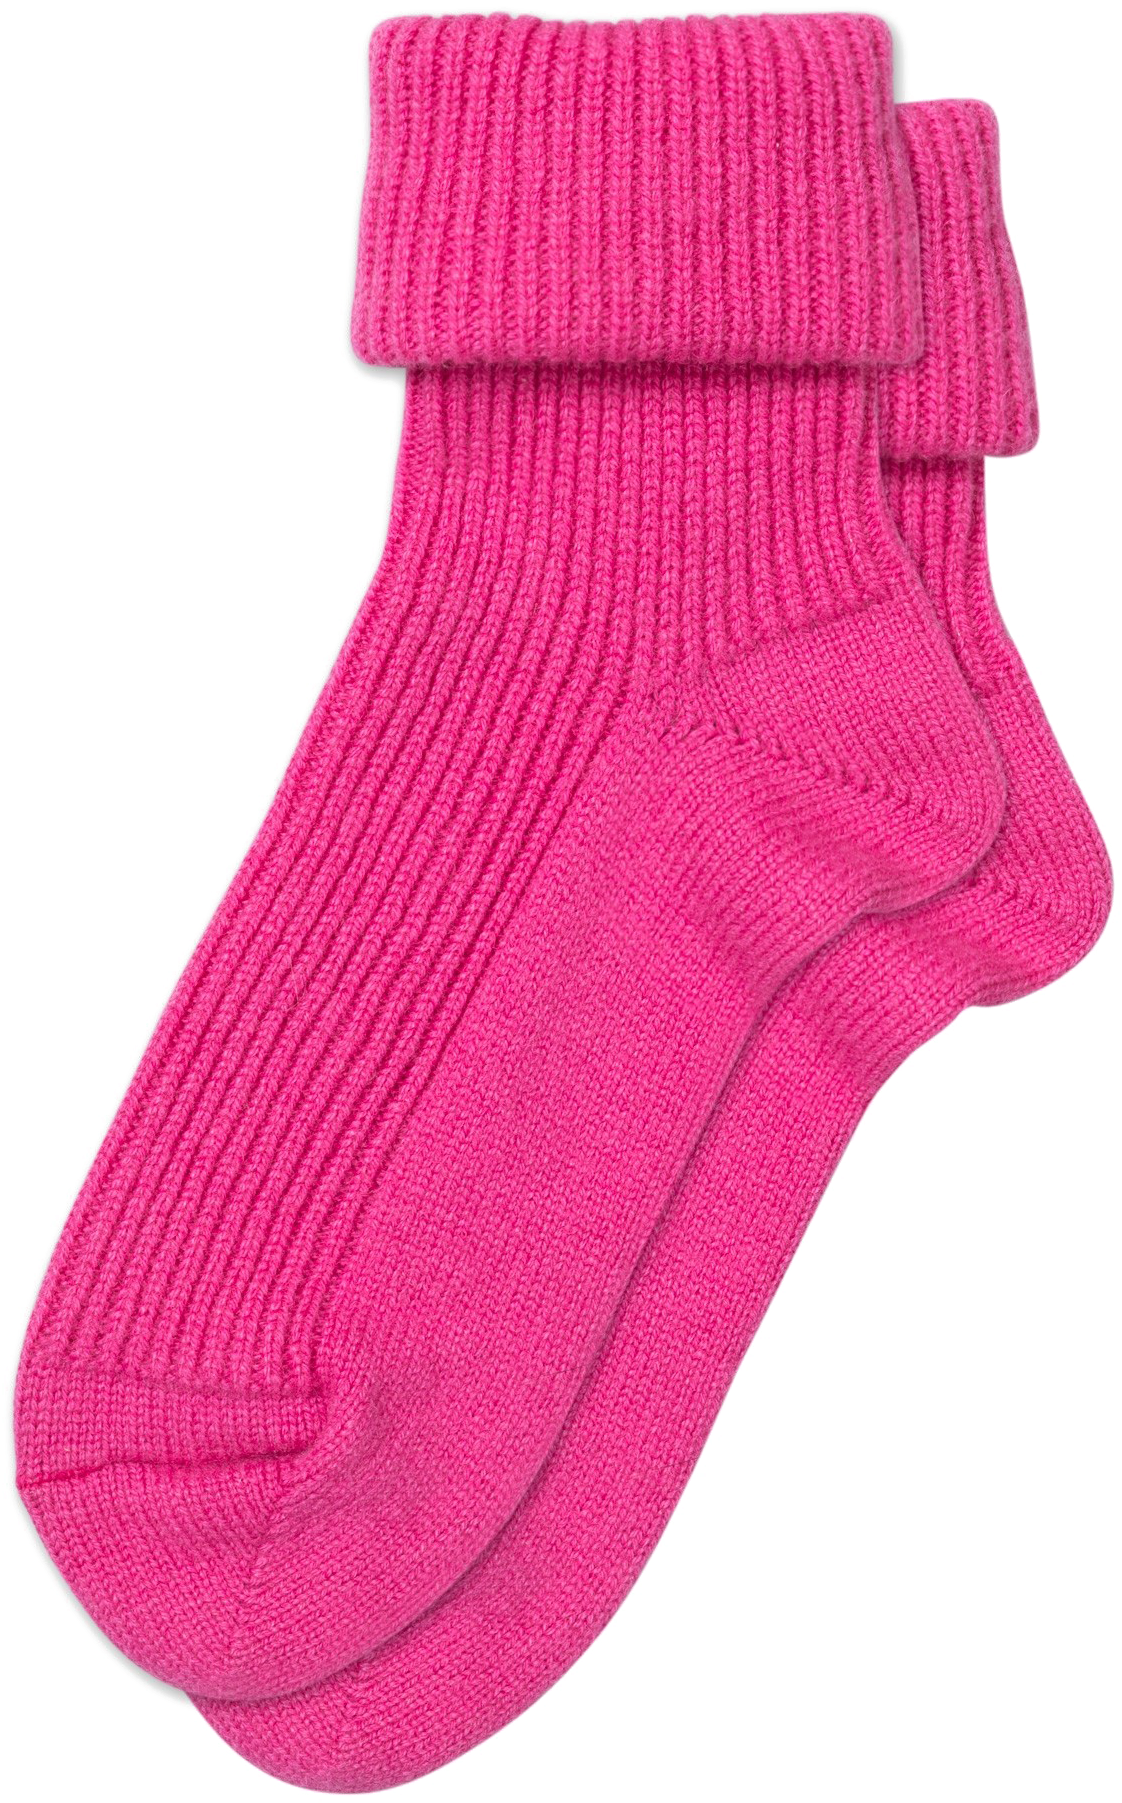 Pink Cuffed Sock Isolated PNG